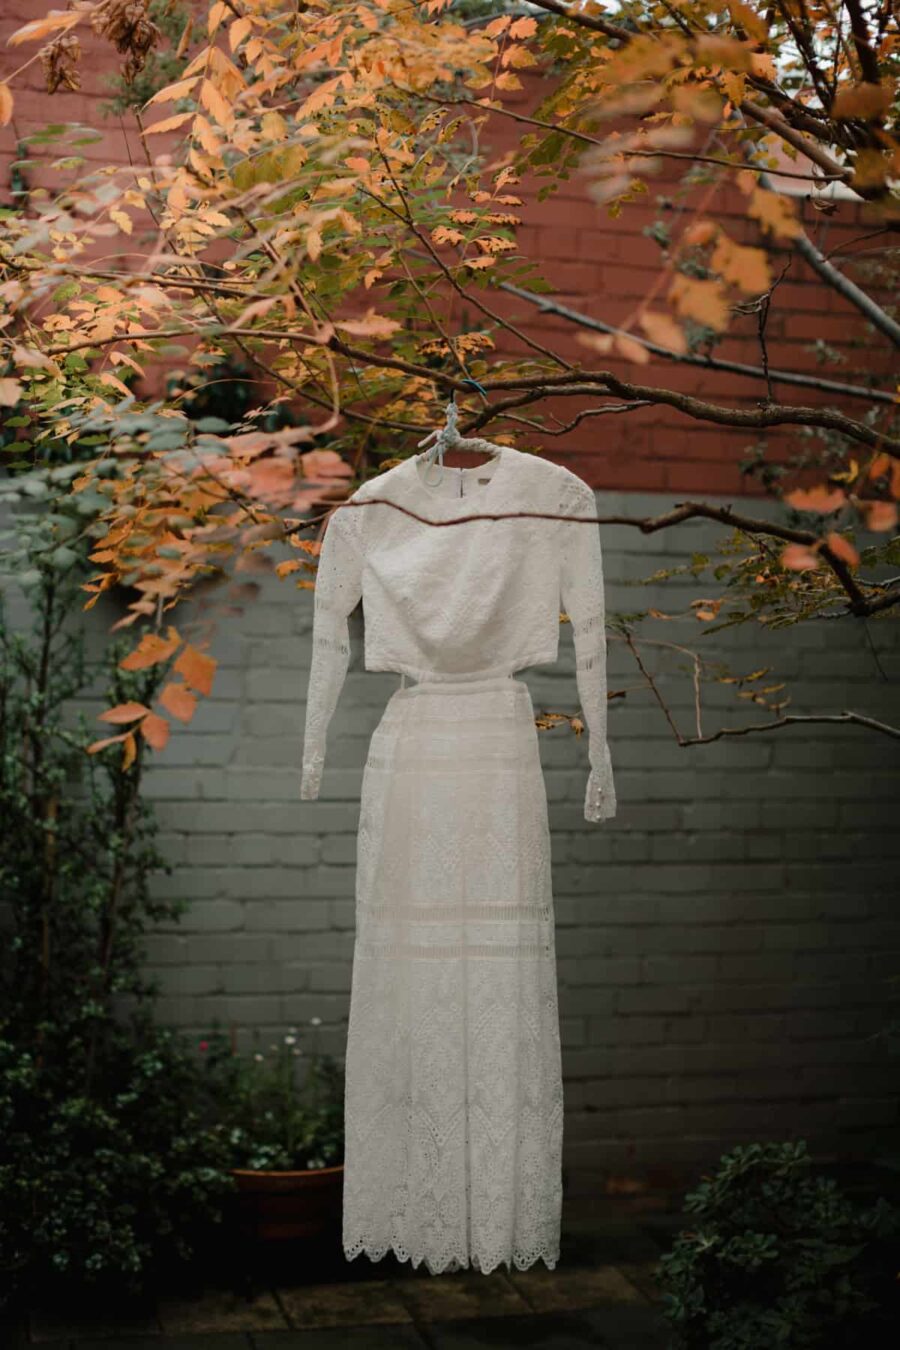 Long sleeve lace wedding dress by Thurley